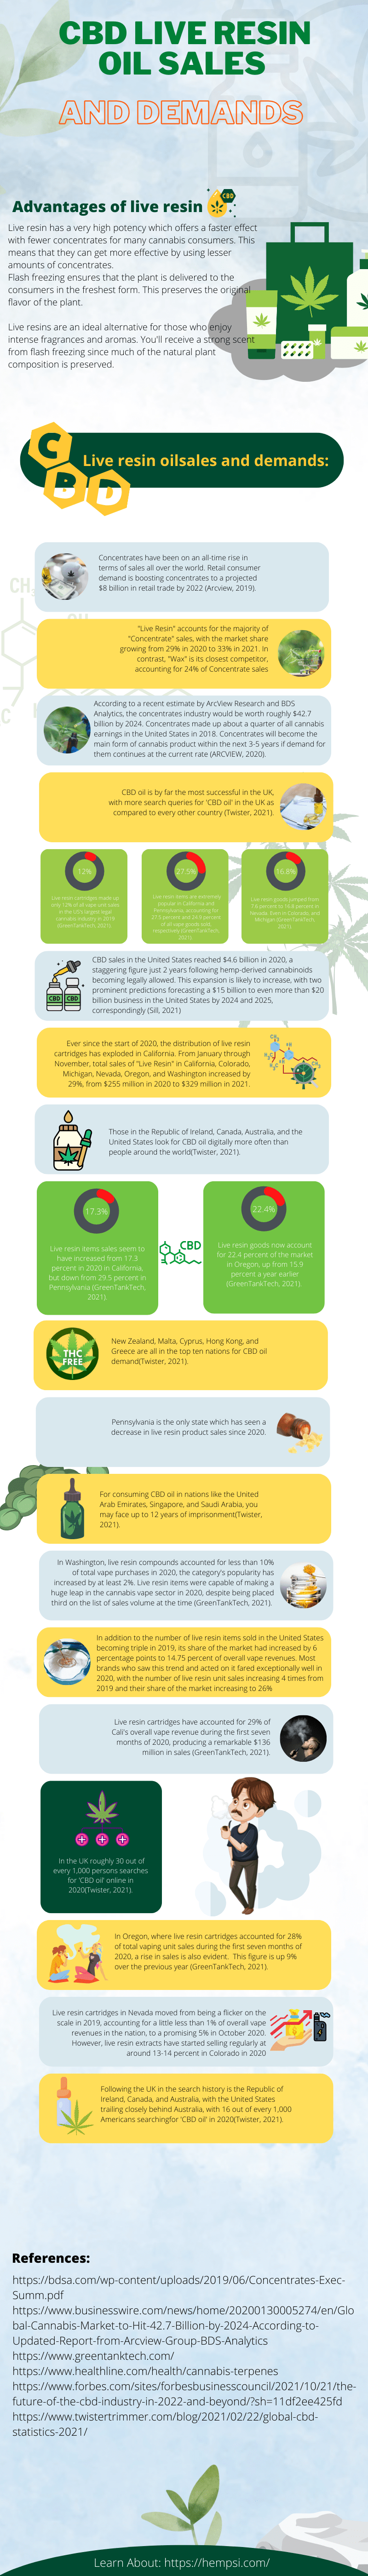 CBD Live Oil Resin And Demands Infographic